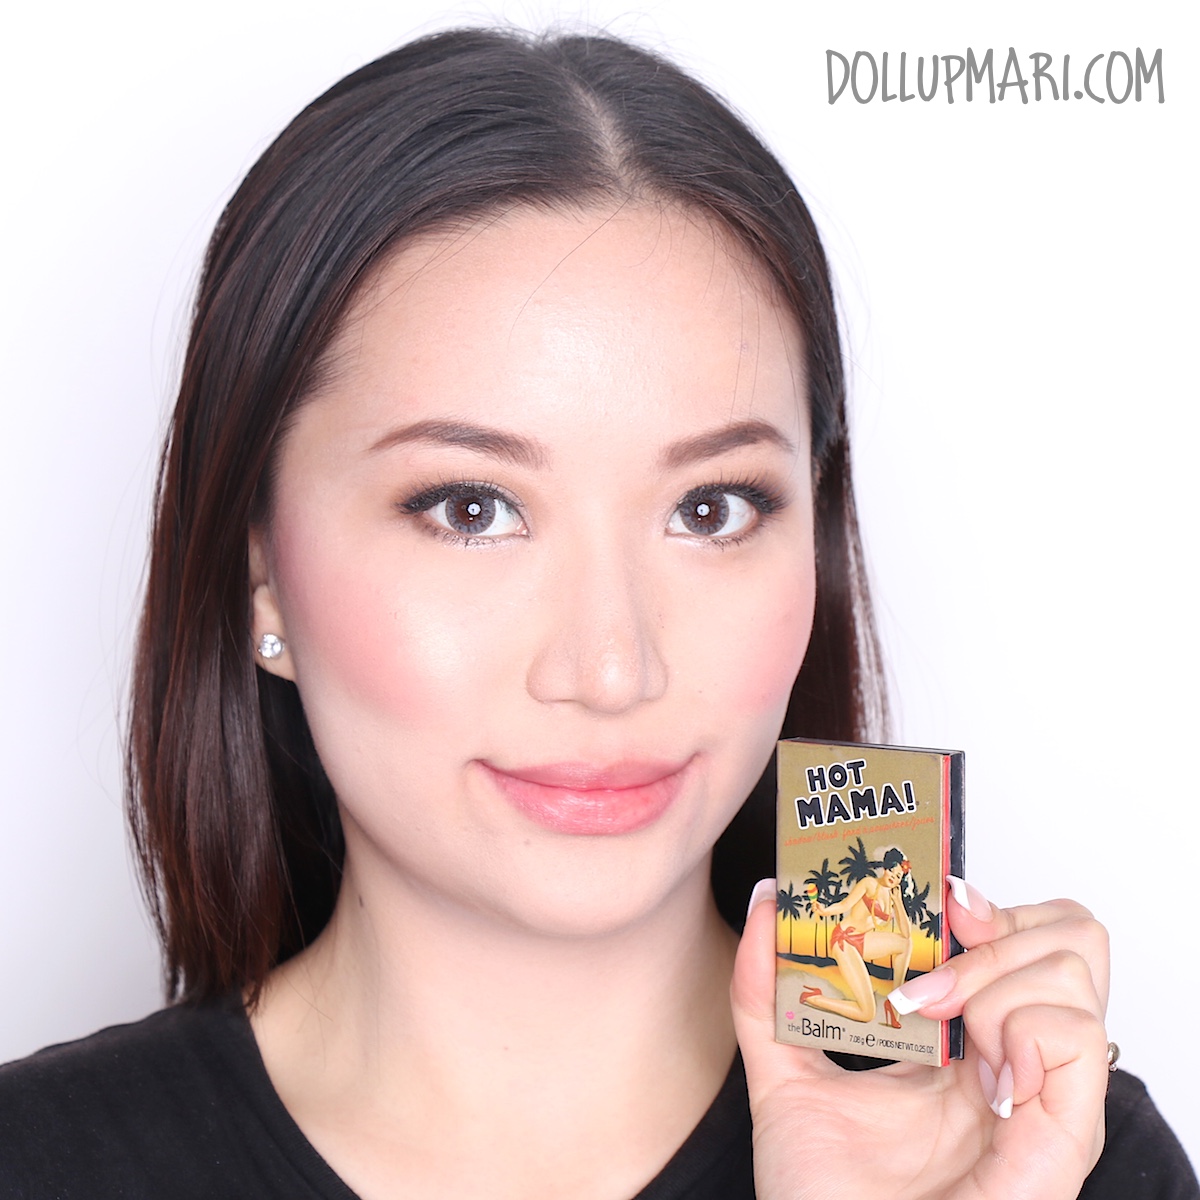 FLOATING IN DREAMS - Reviews . Makeup . Fashion . everyday beauty made  sense. The Balm Hot Mama